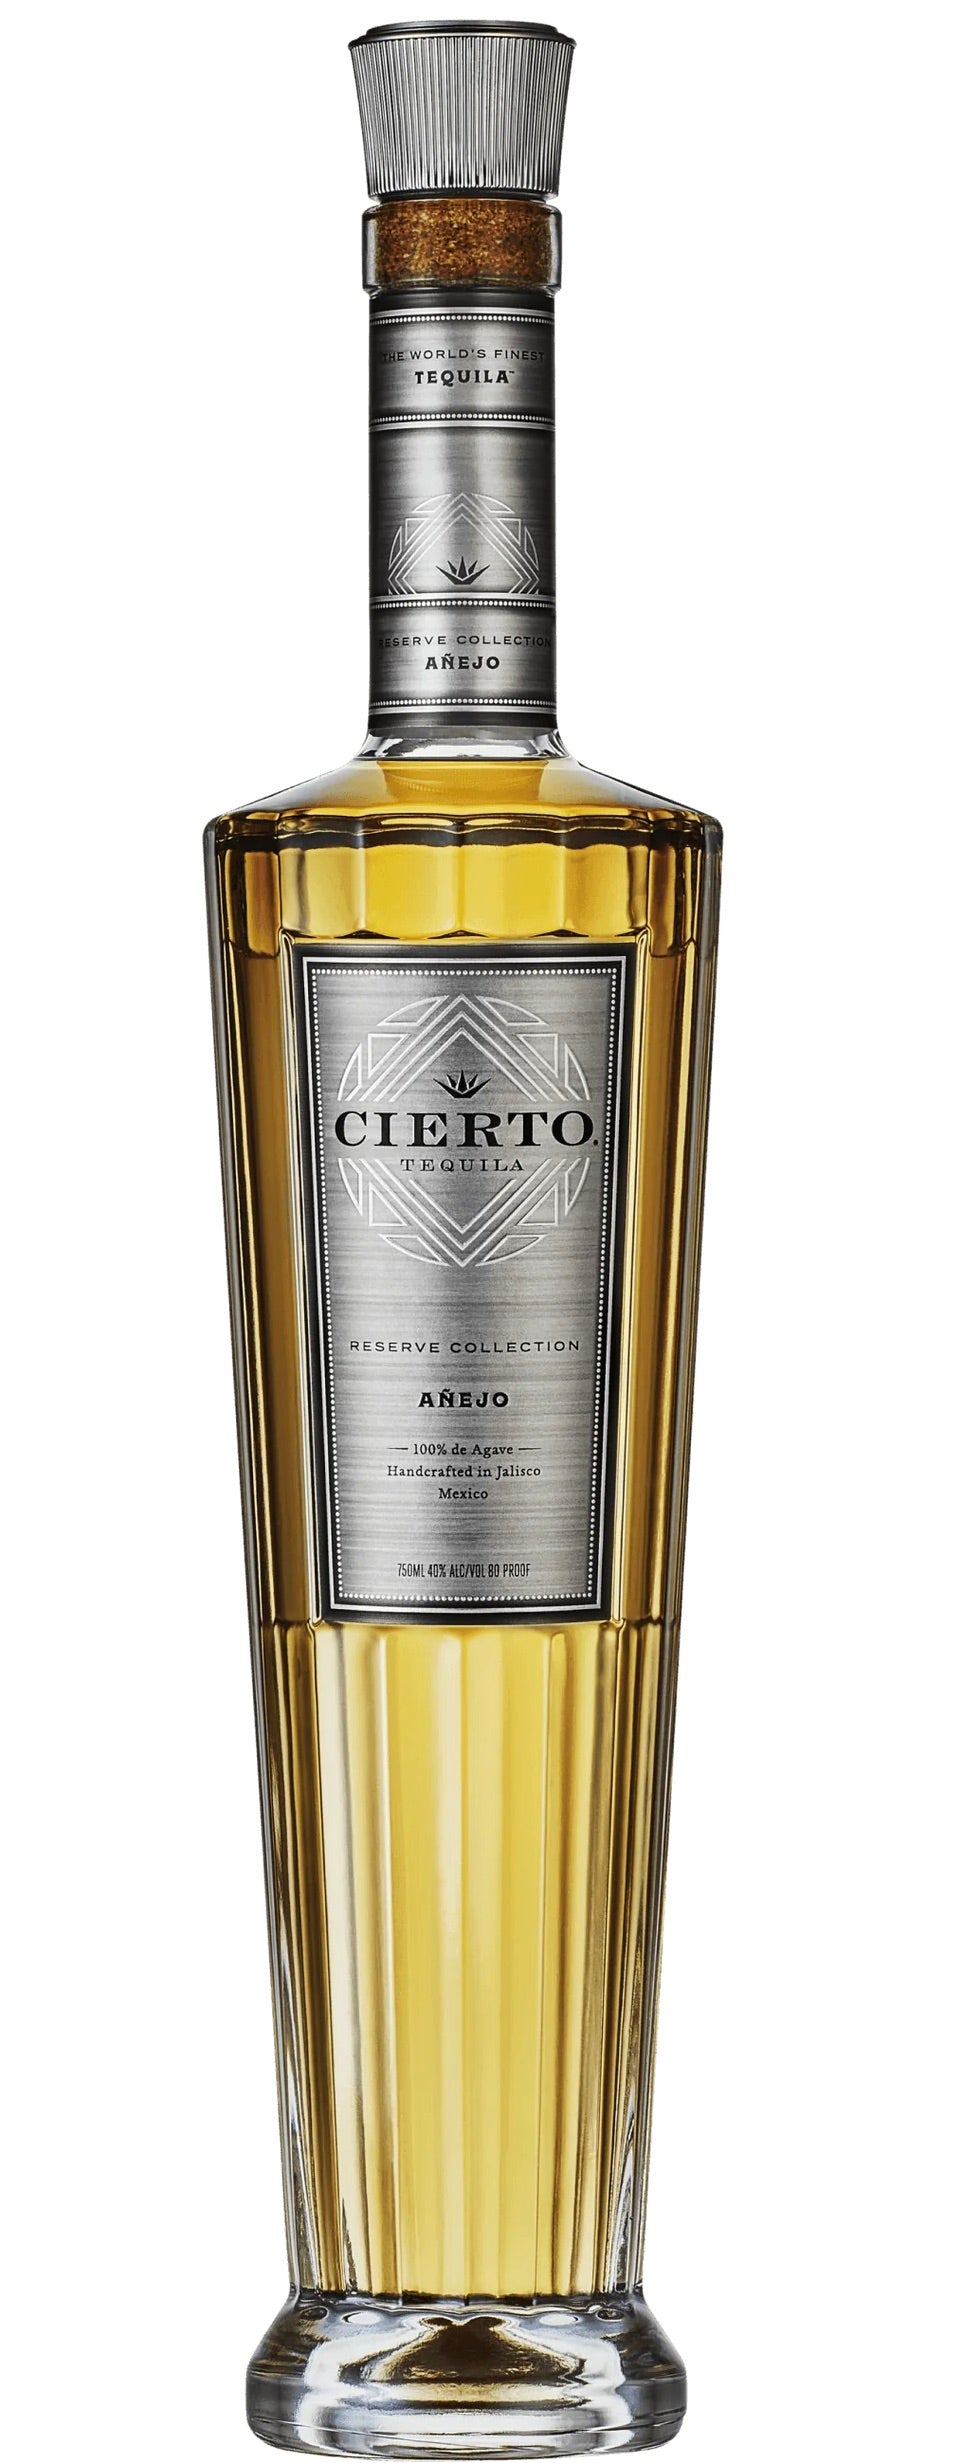 Cierto Tequila Anejo Reserve Collection